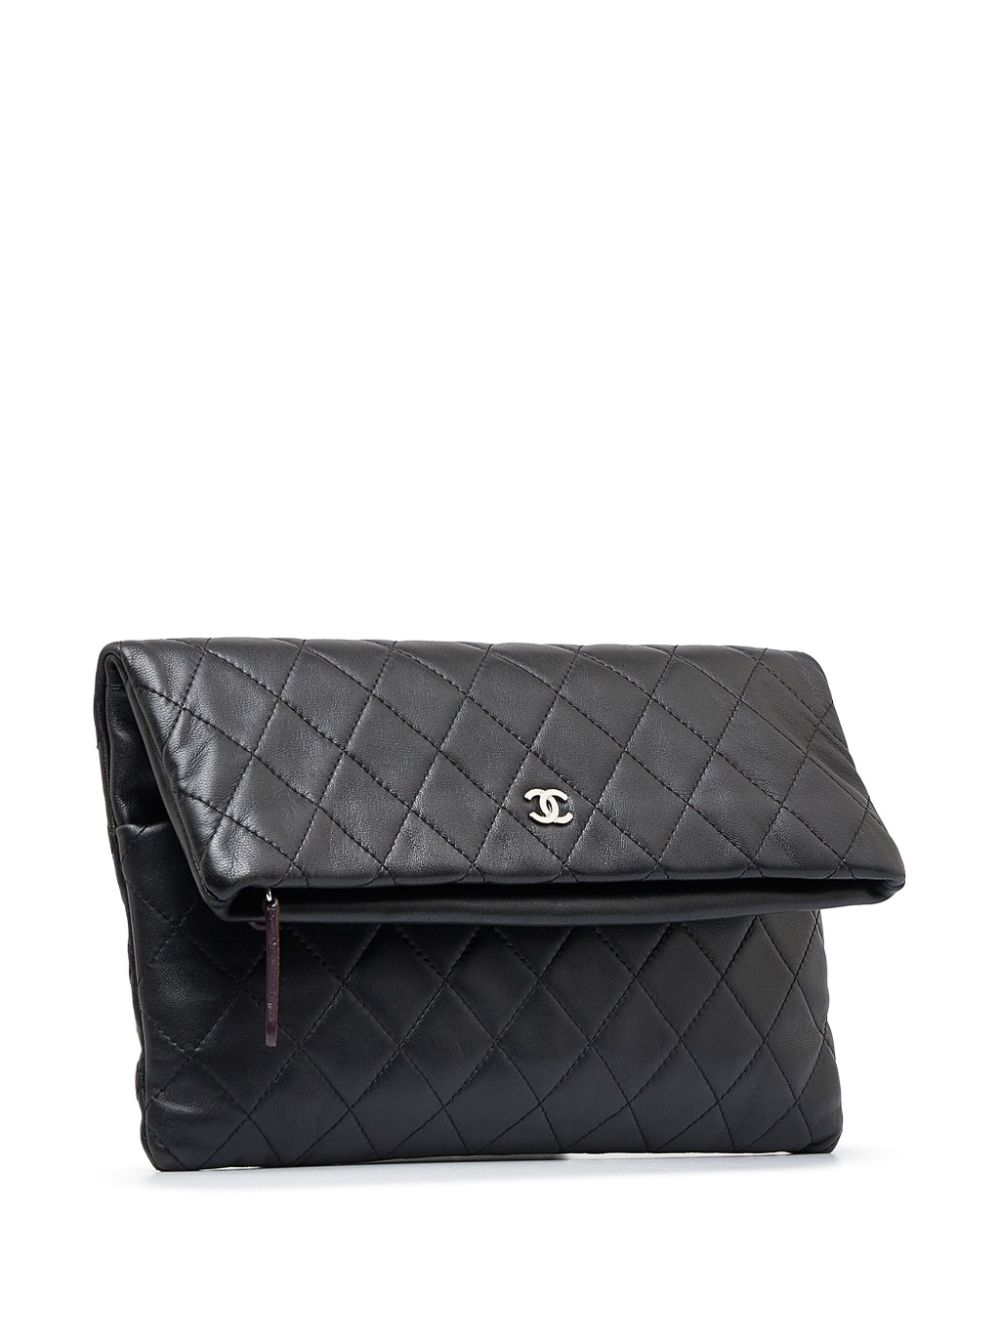 CHANEL Pre-Owned 2014 CC diamond-quilted Clutch Bag - Farfetch